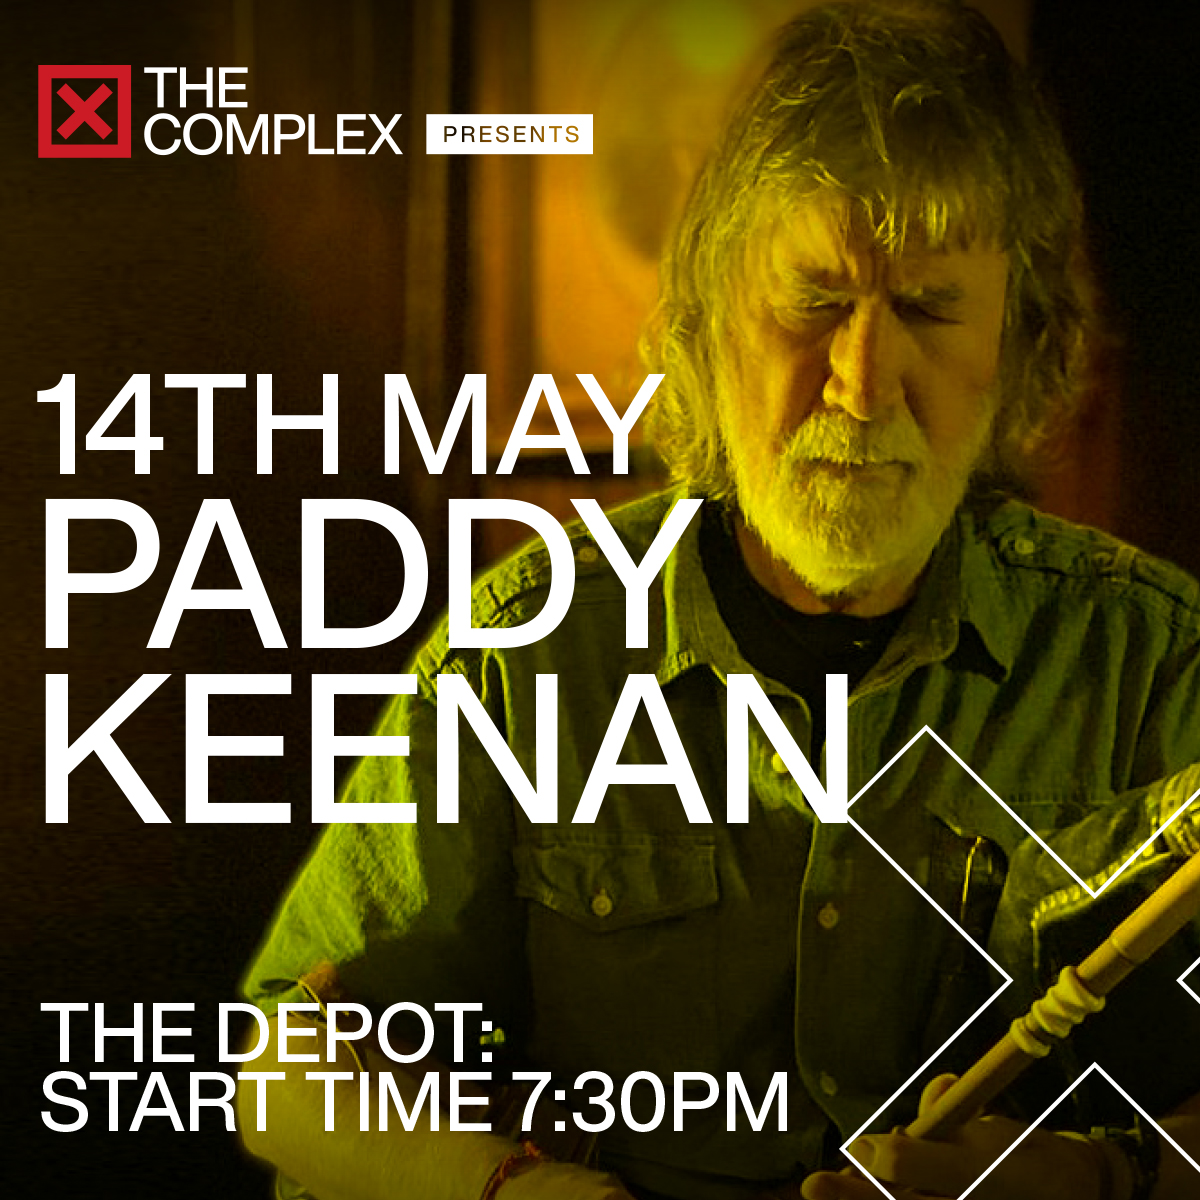 PADDY KEENAN LIVE @ THE COMPLEX